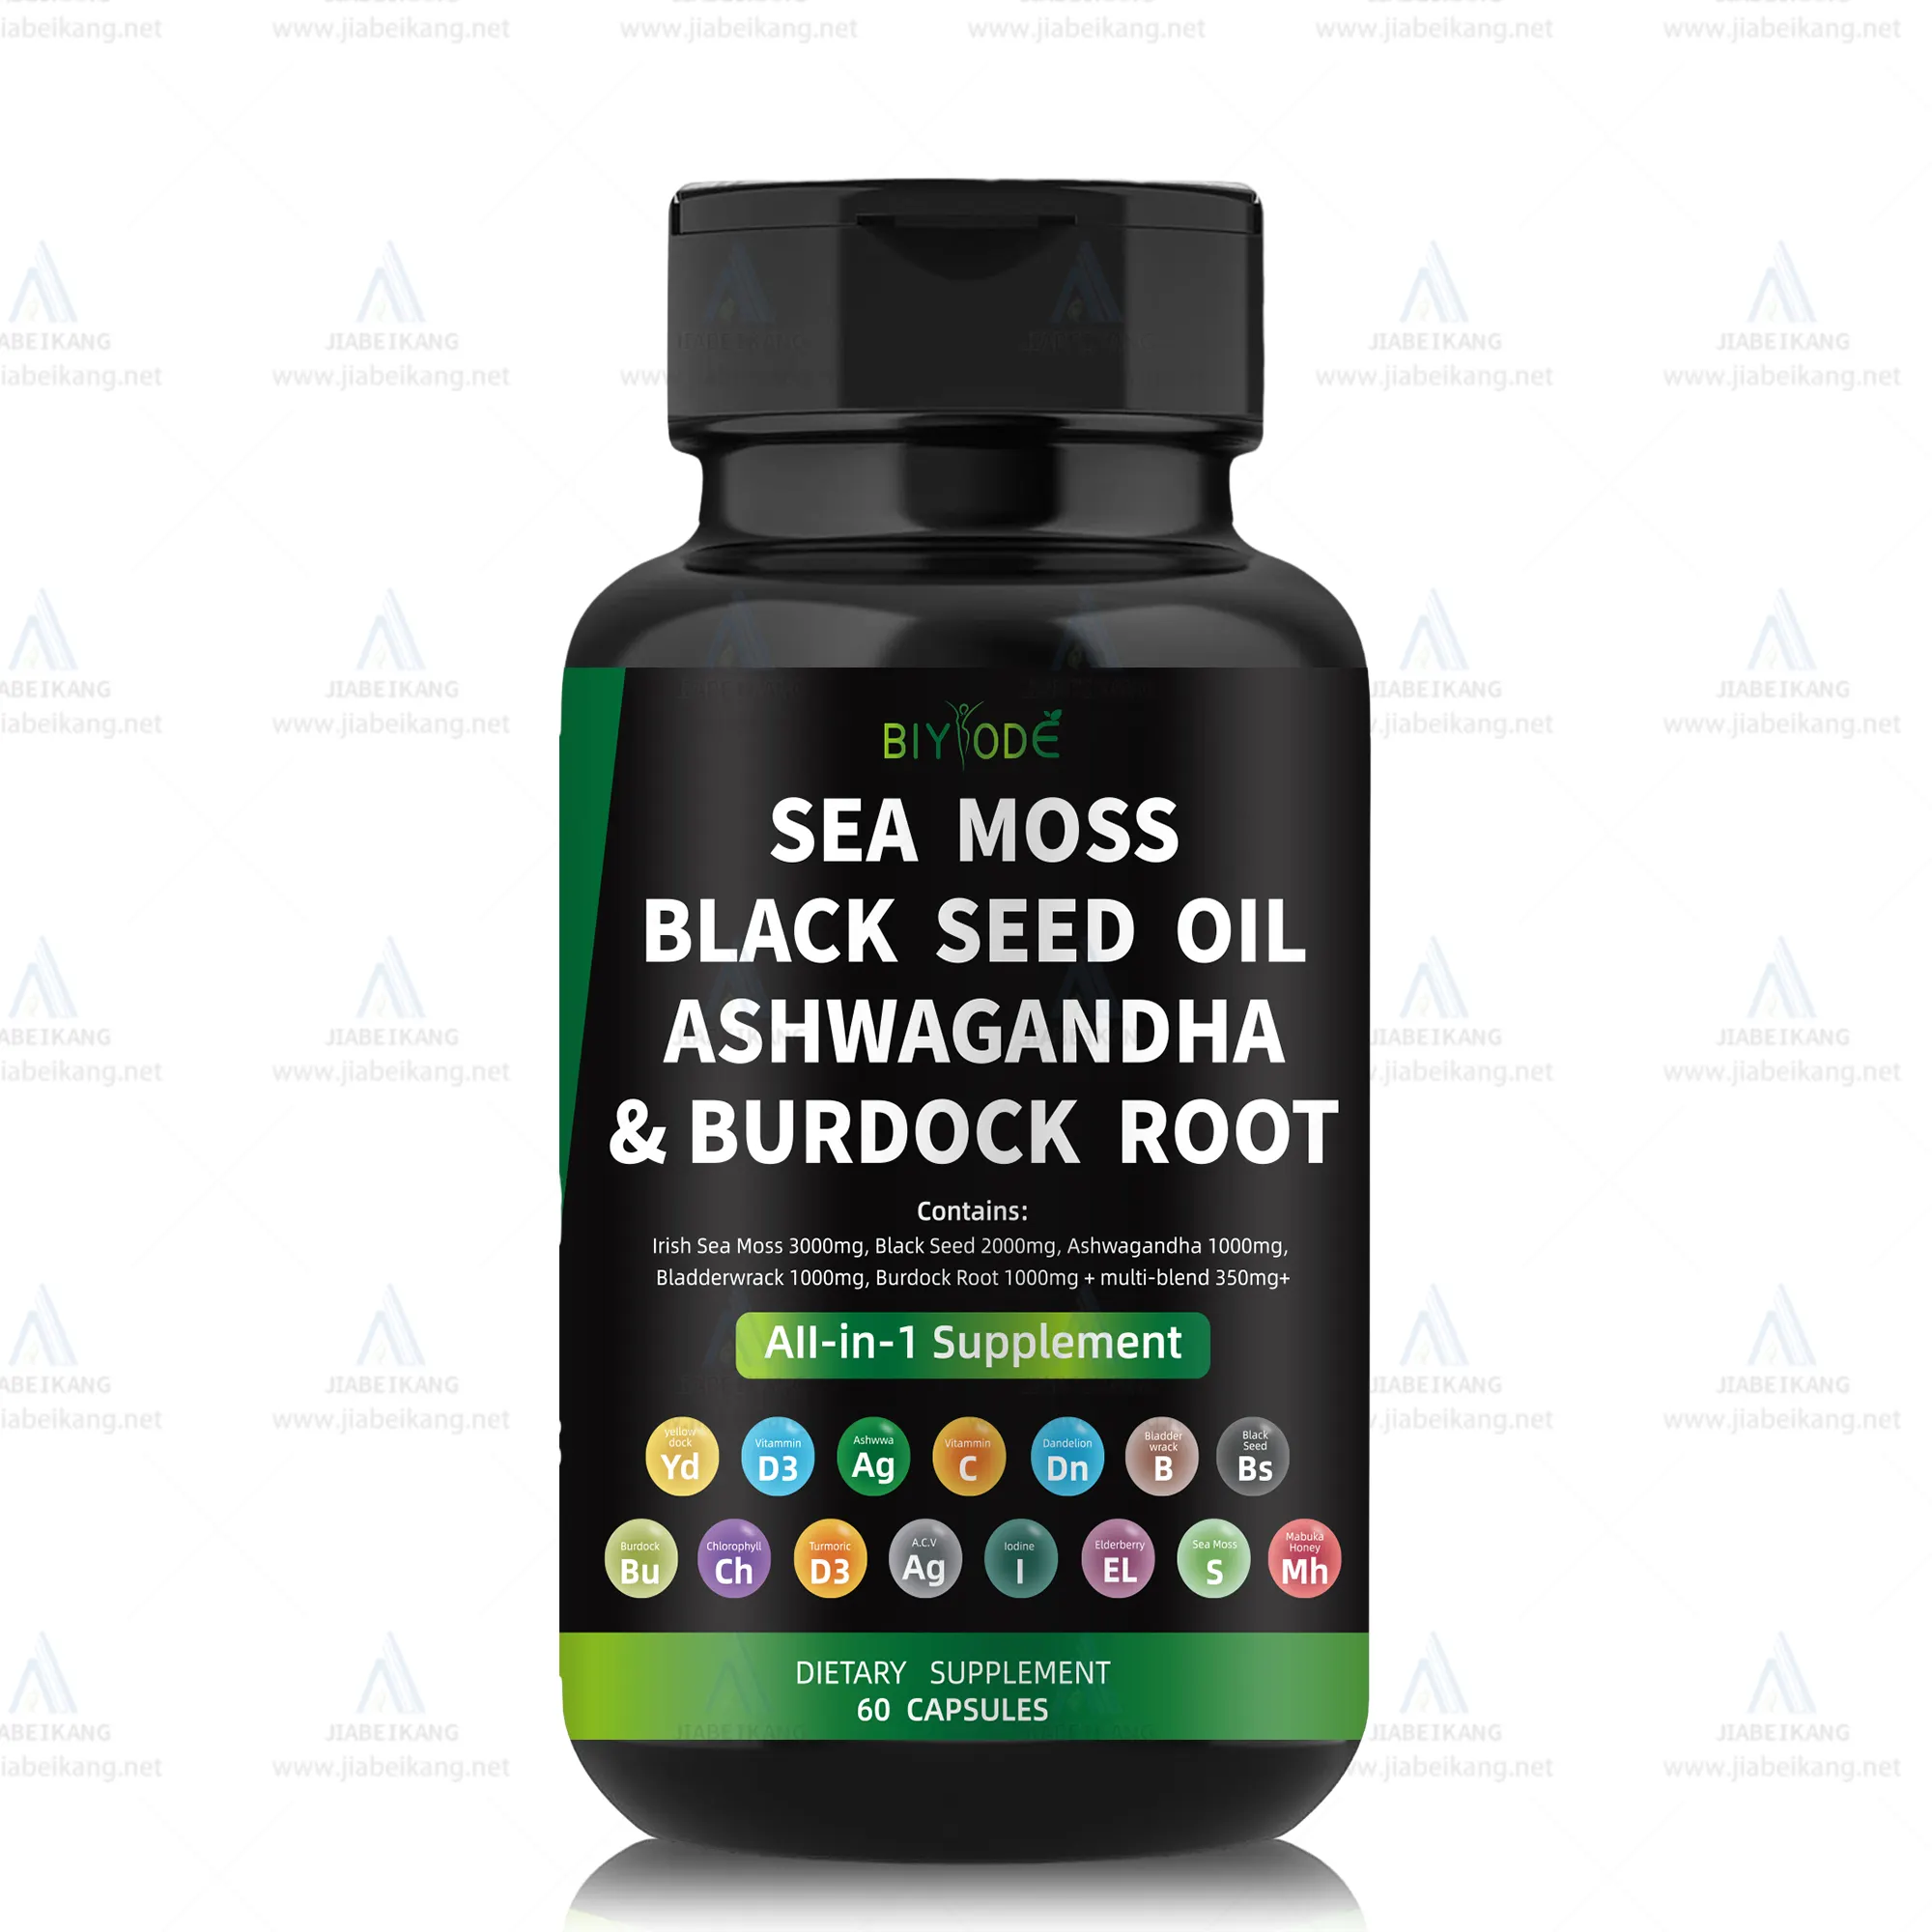 Biyode Private Label Oem Wholesale Multimineral Vitamin Sea Moss 3000mg Black Seed Oil 2000mg Detox Supplement Seamoss Capsules